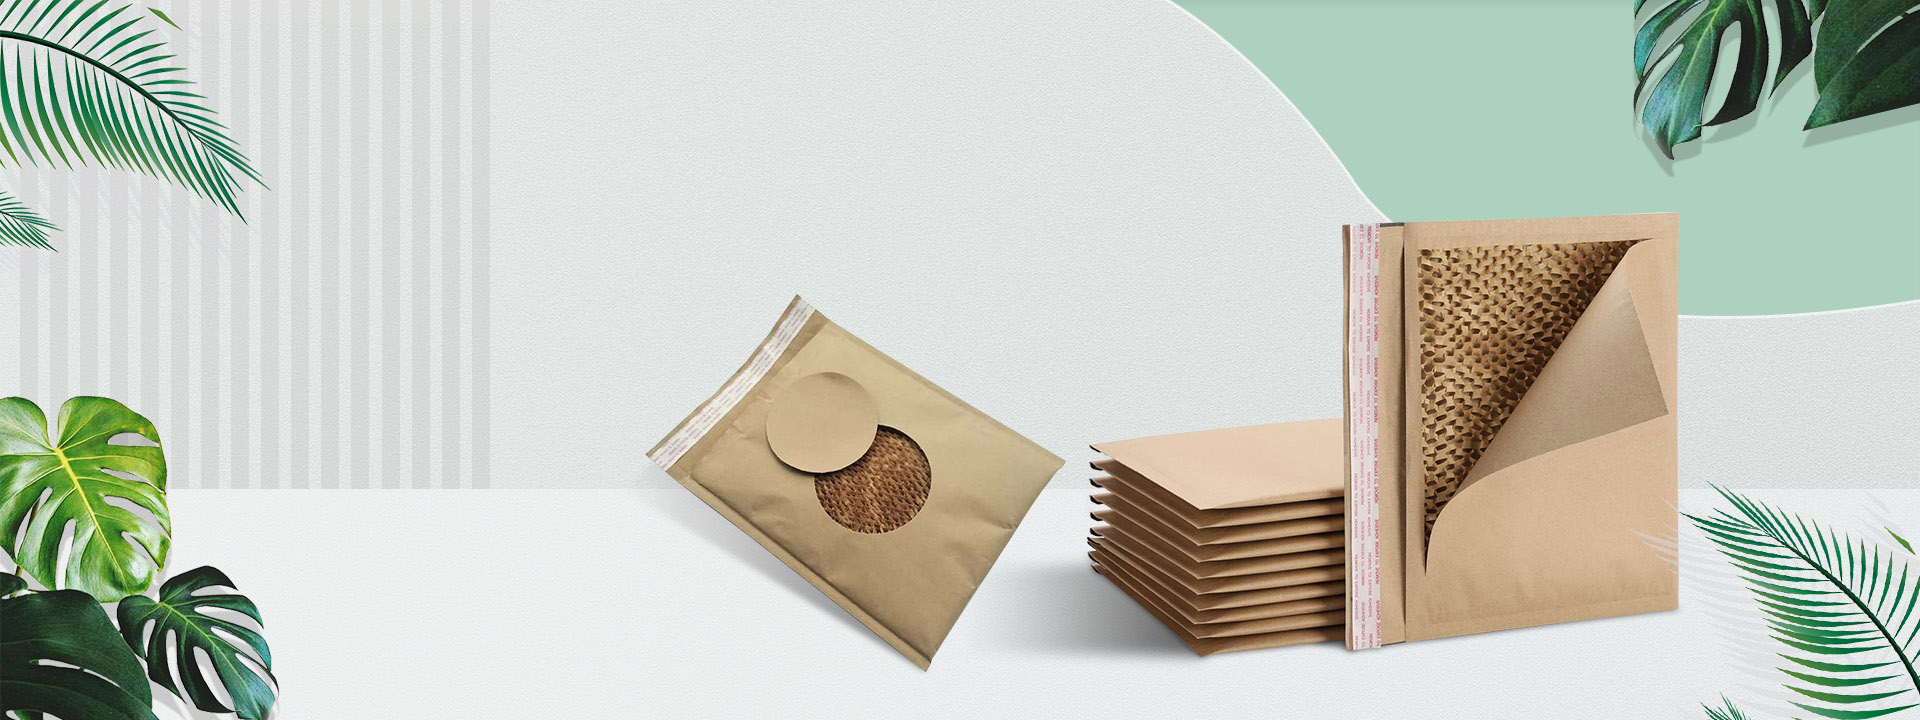 Luxury ECO Hart shape paper box for food